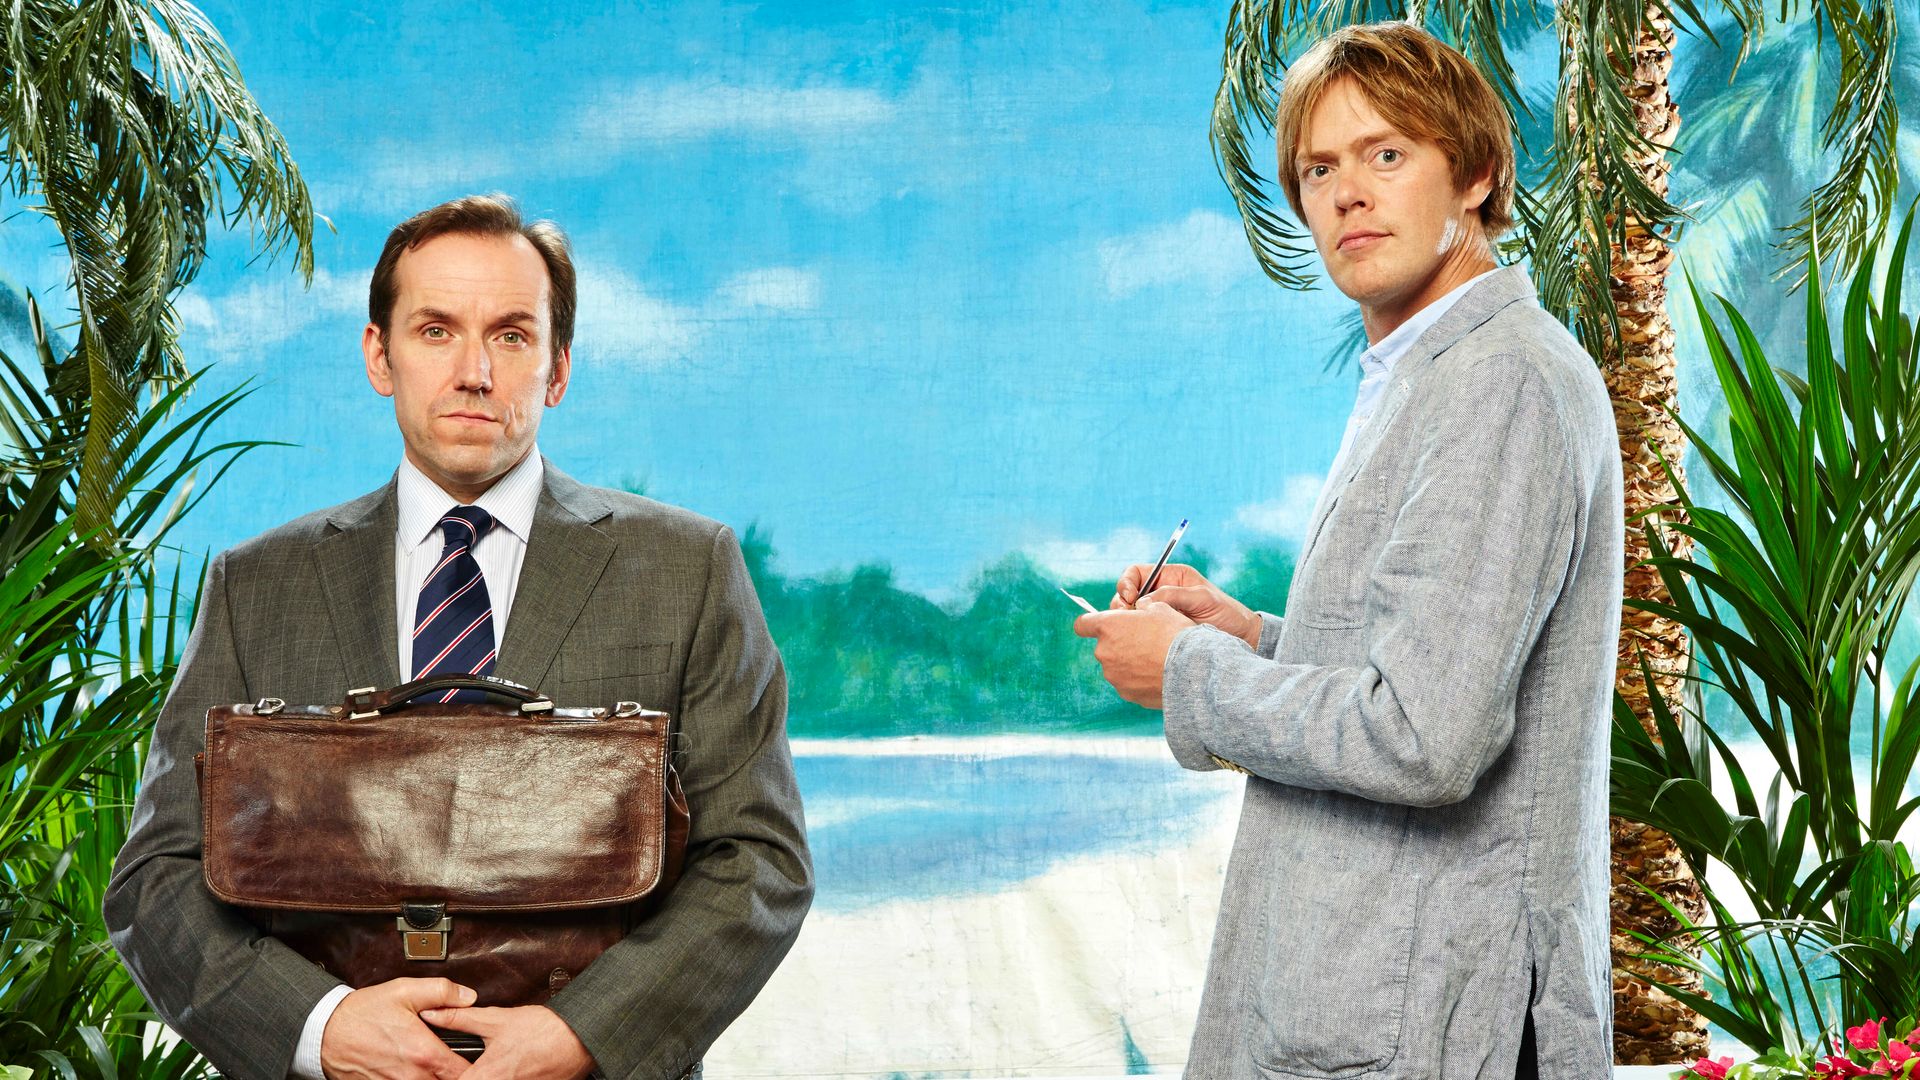 Death In Paradise actors Ben Miller and Kris Marshall, October 11, 2013